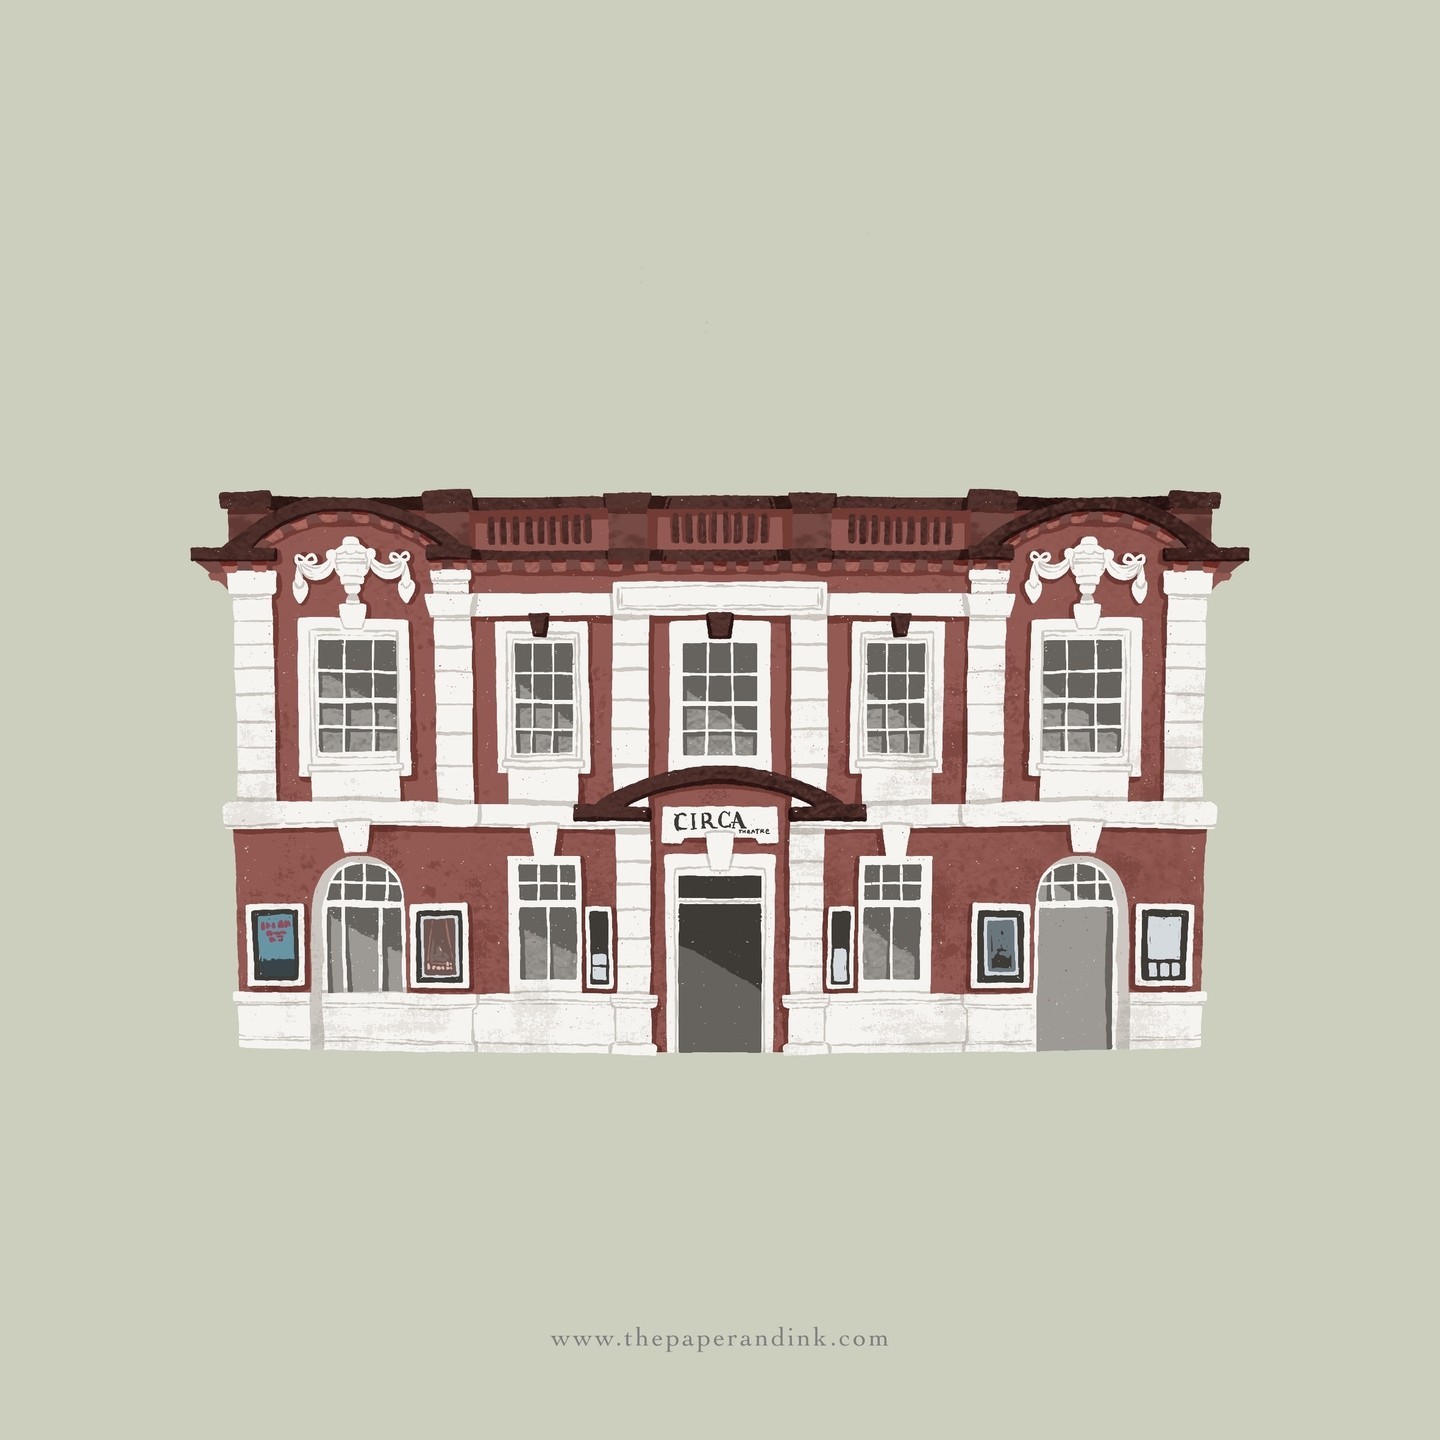 @circatheatre for this week's challenge!⁠
I love how symmetrical this building looks! I love symmetrical houses, it satisfies me just by looking at them.⁠
⁠
Our neighbor recently told me they have an annual Christmas trip to the theatre. Hmm, I've never been there even once 😗⁠
⁠
#thepaperandink